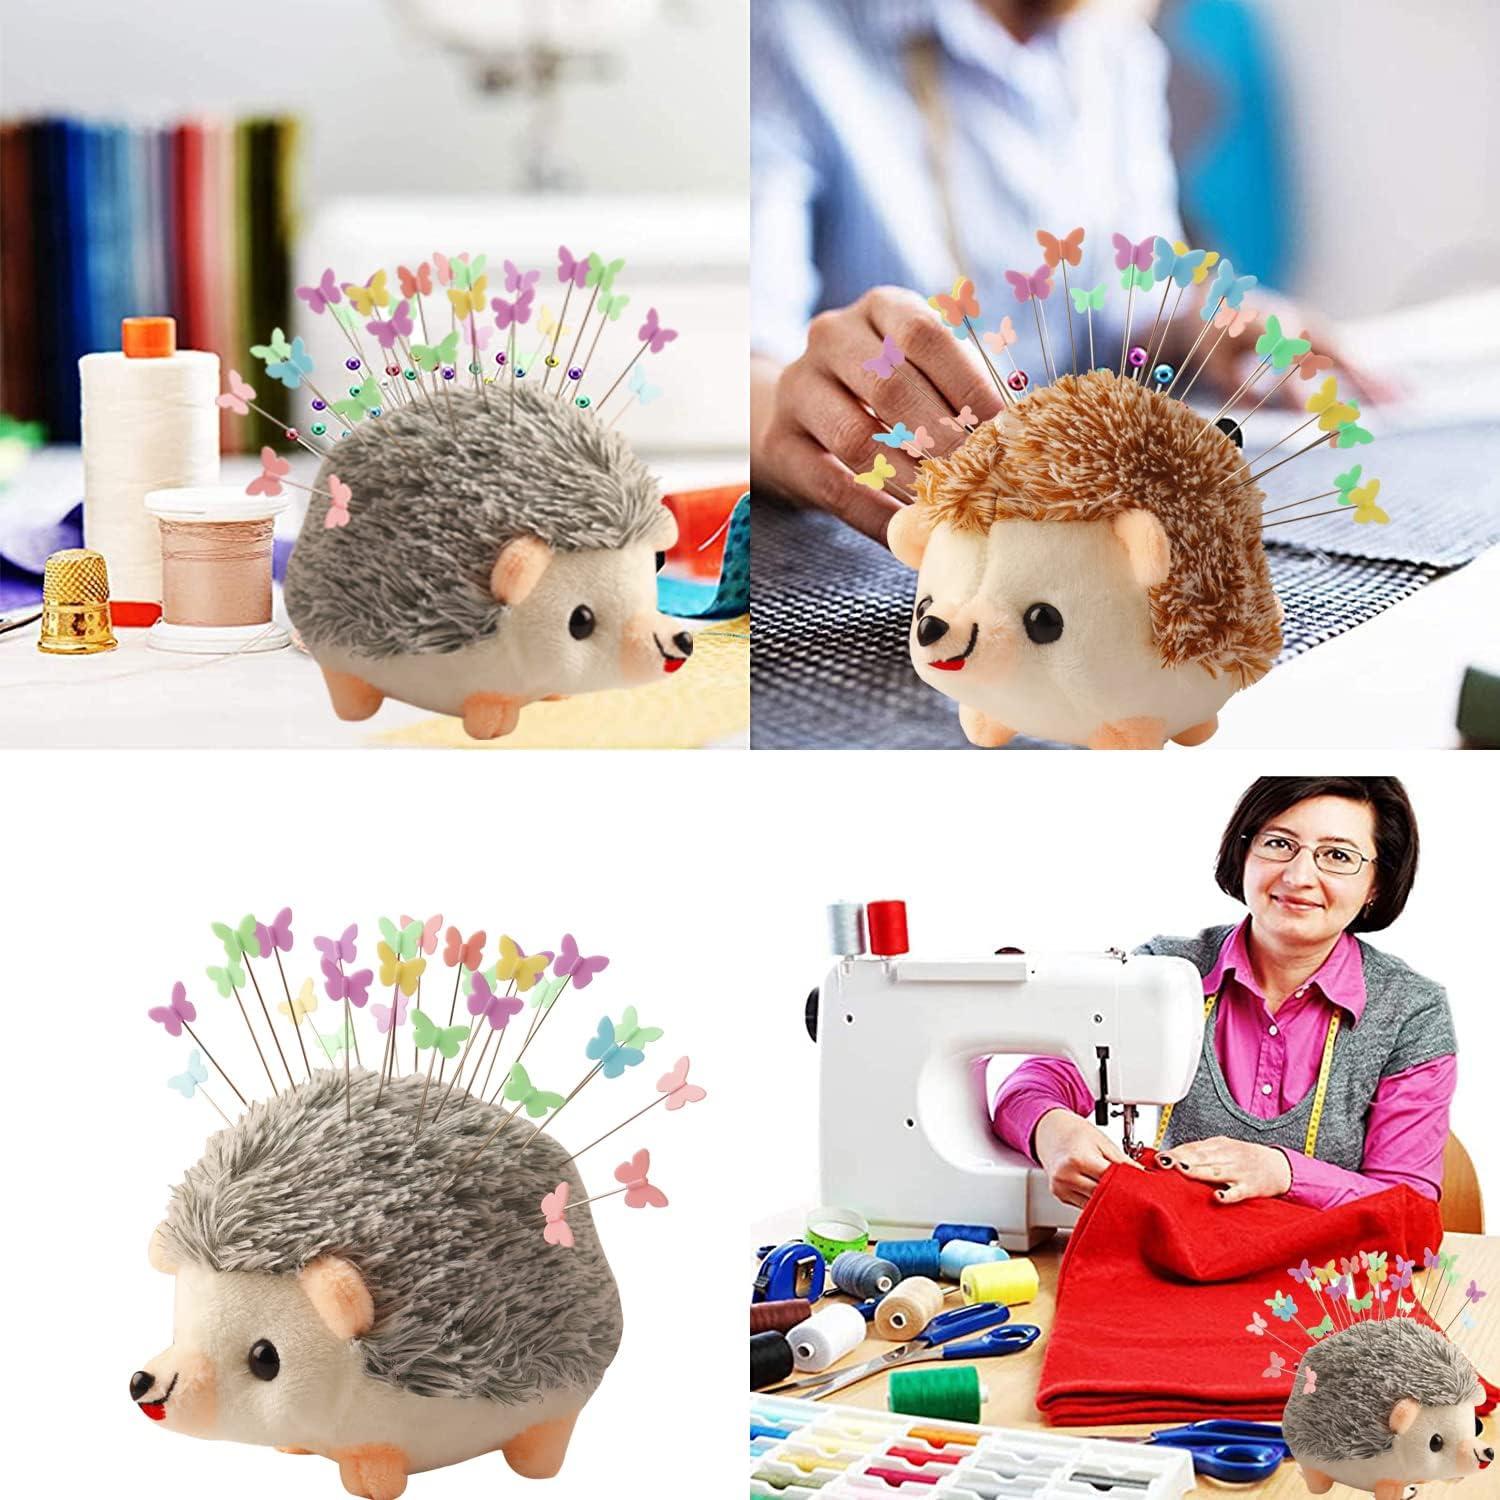 Pin Cushion, Cute Hedgehog Shape Pin Cushion Sewing Needle Cushions Holder  Sewing Accessory for Sewing DIY Crafts 